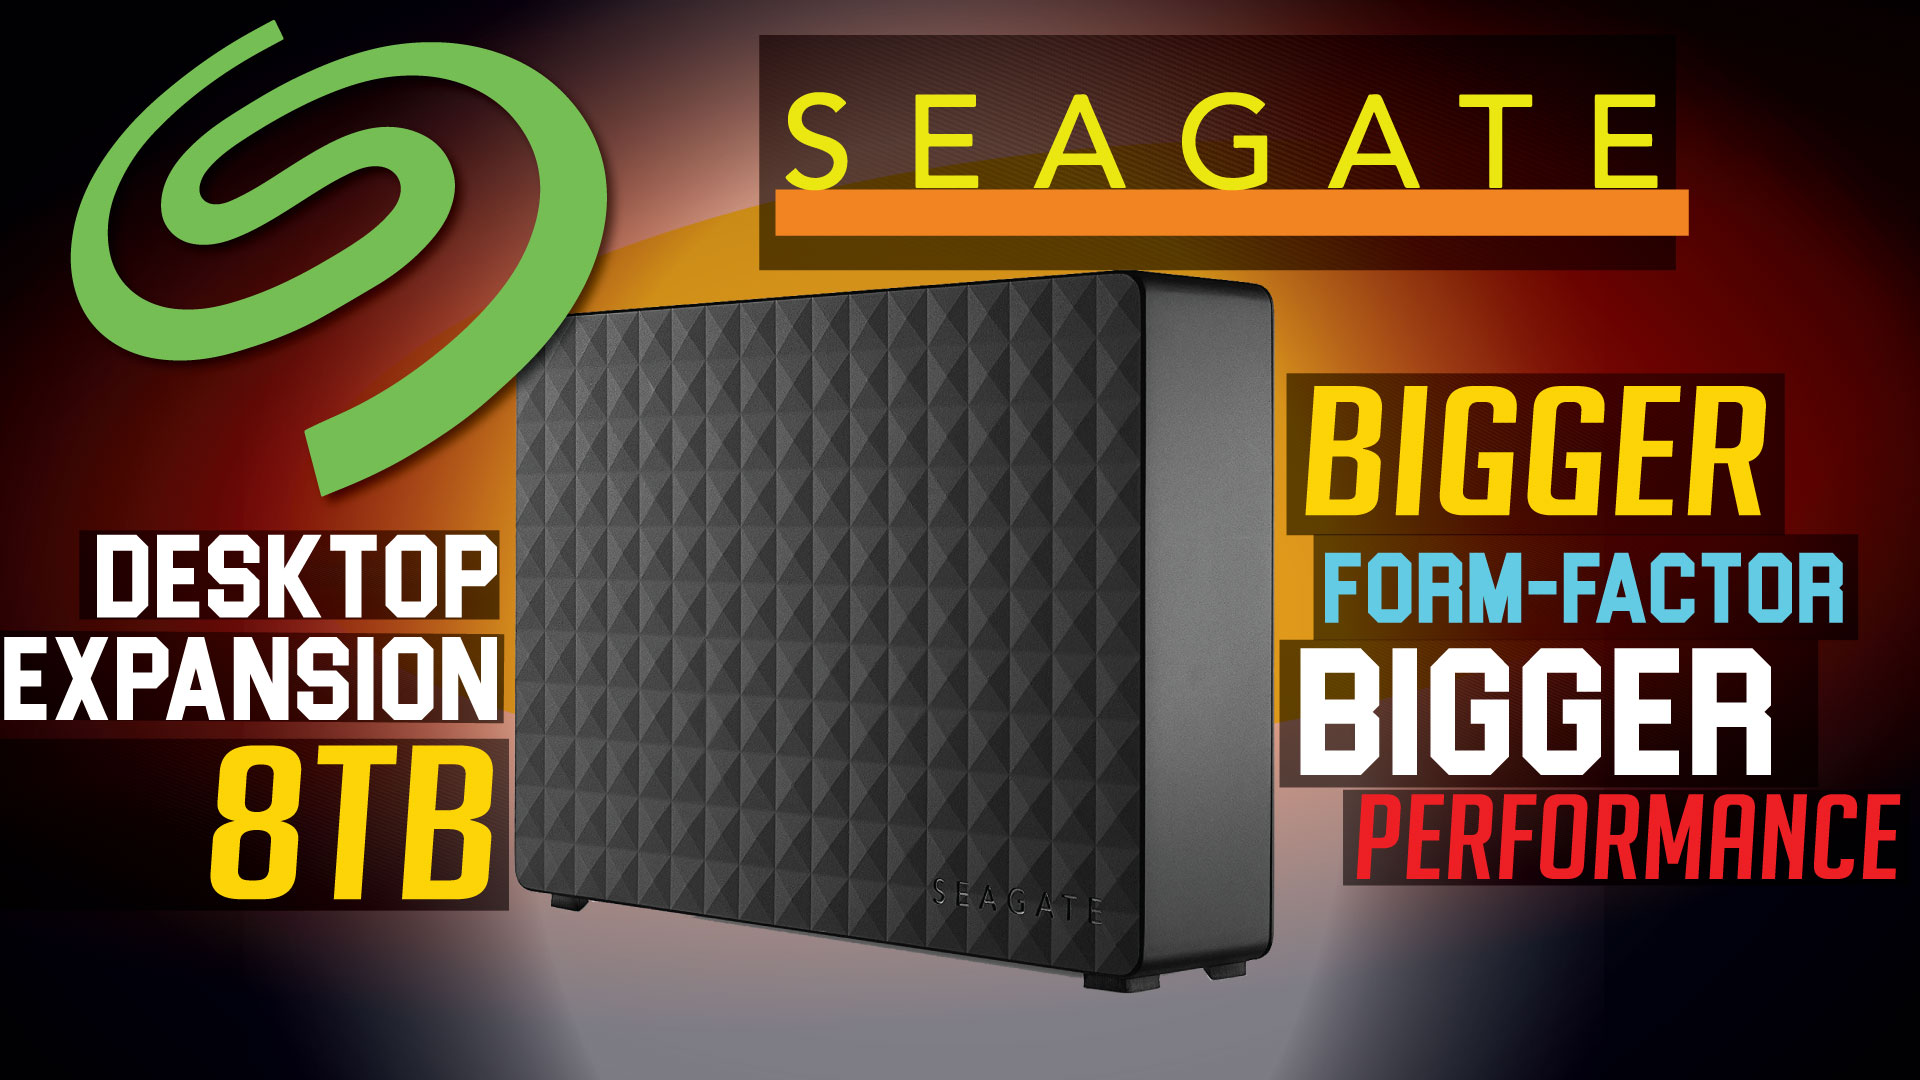 Seagate Desktop Expansion 8TB Review | Real Hardware Reviews